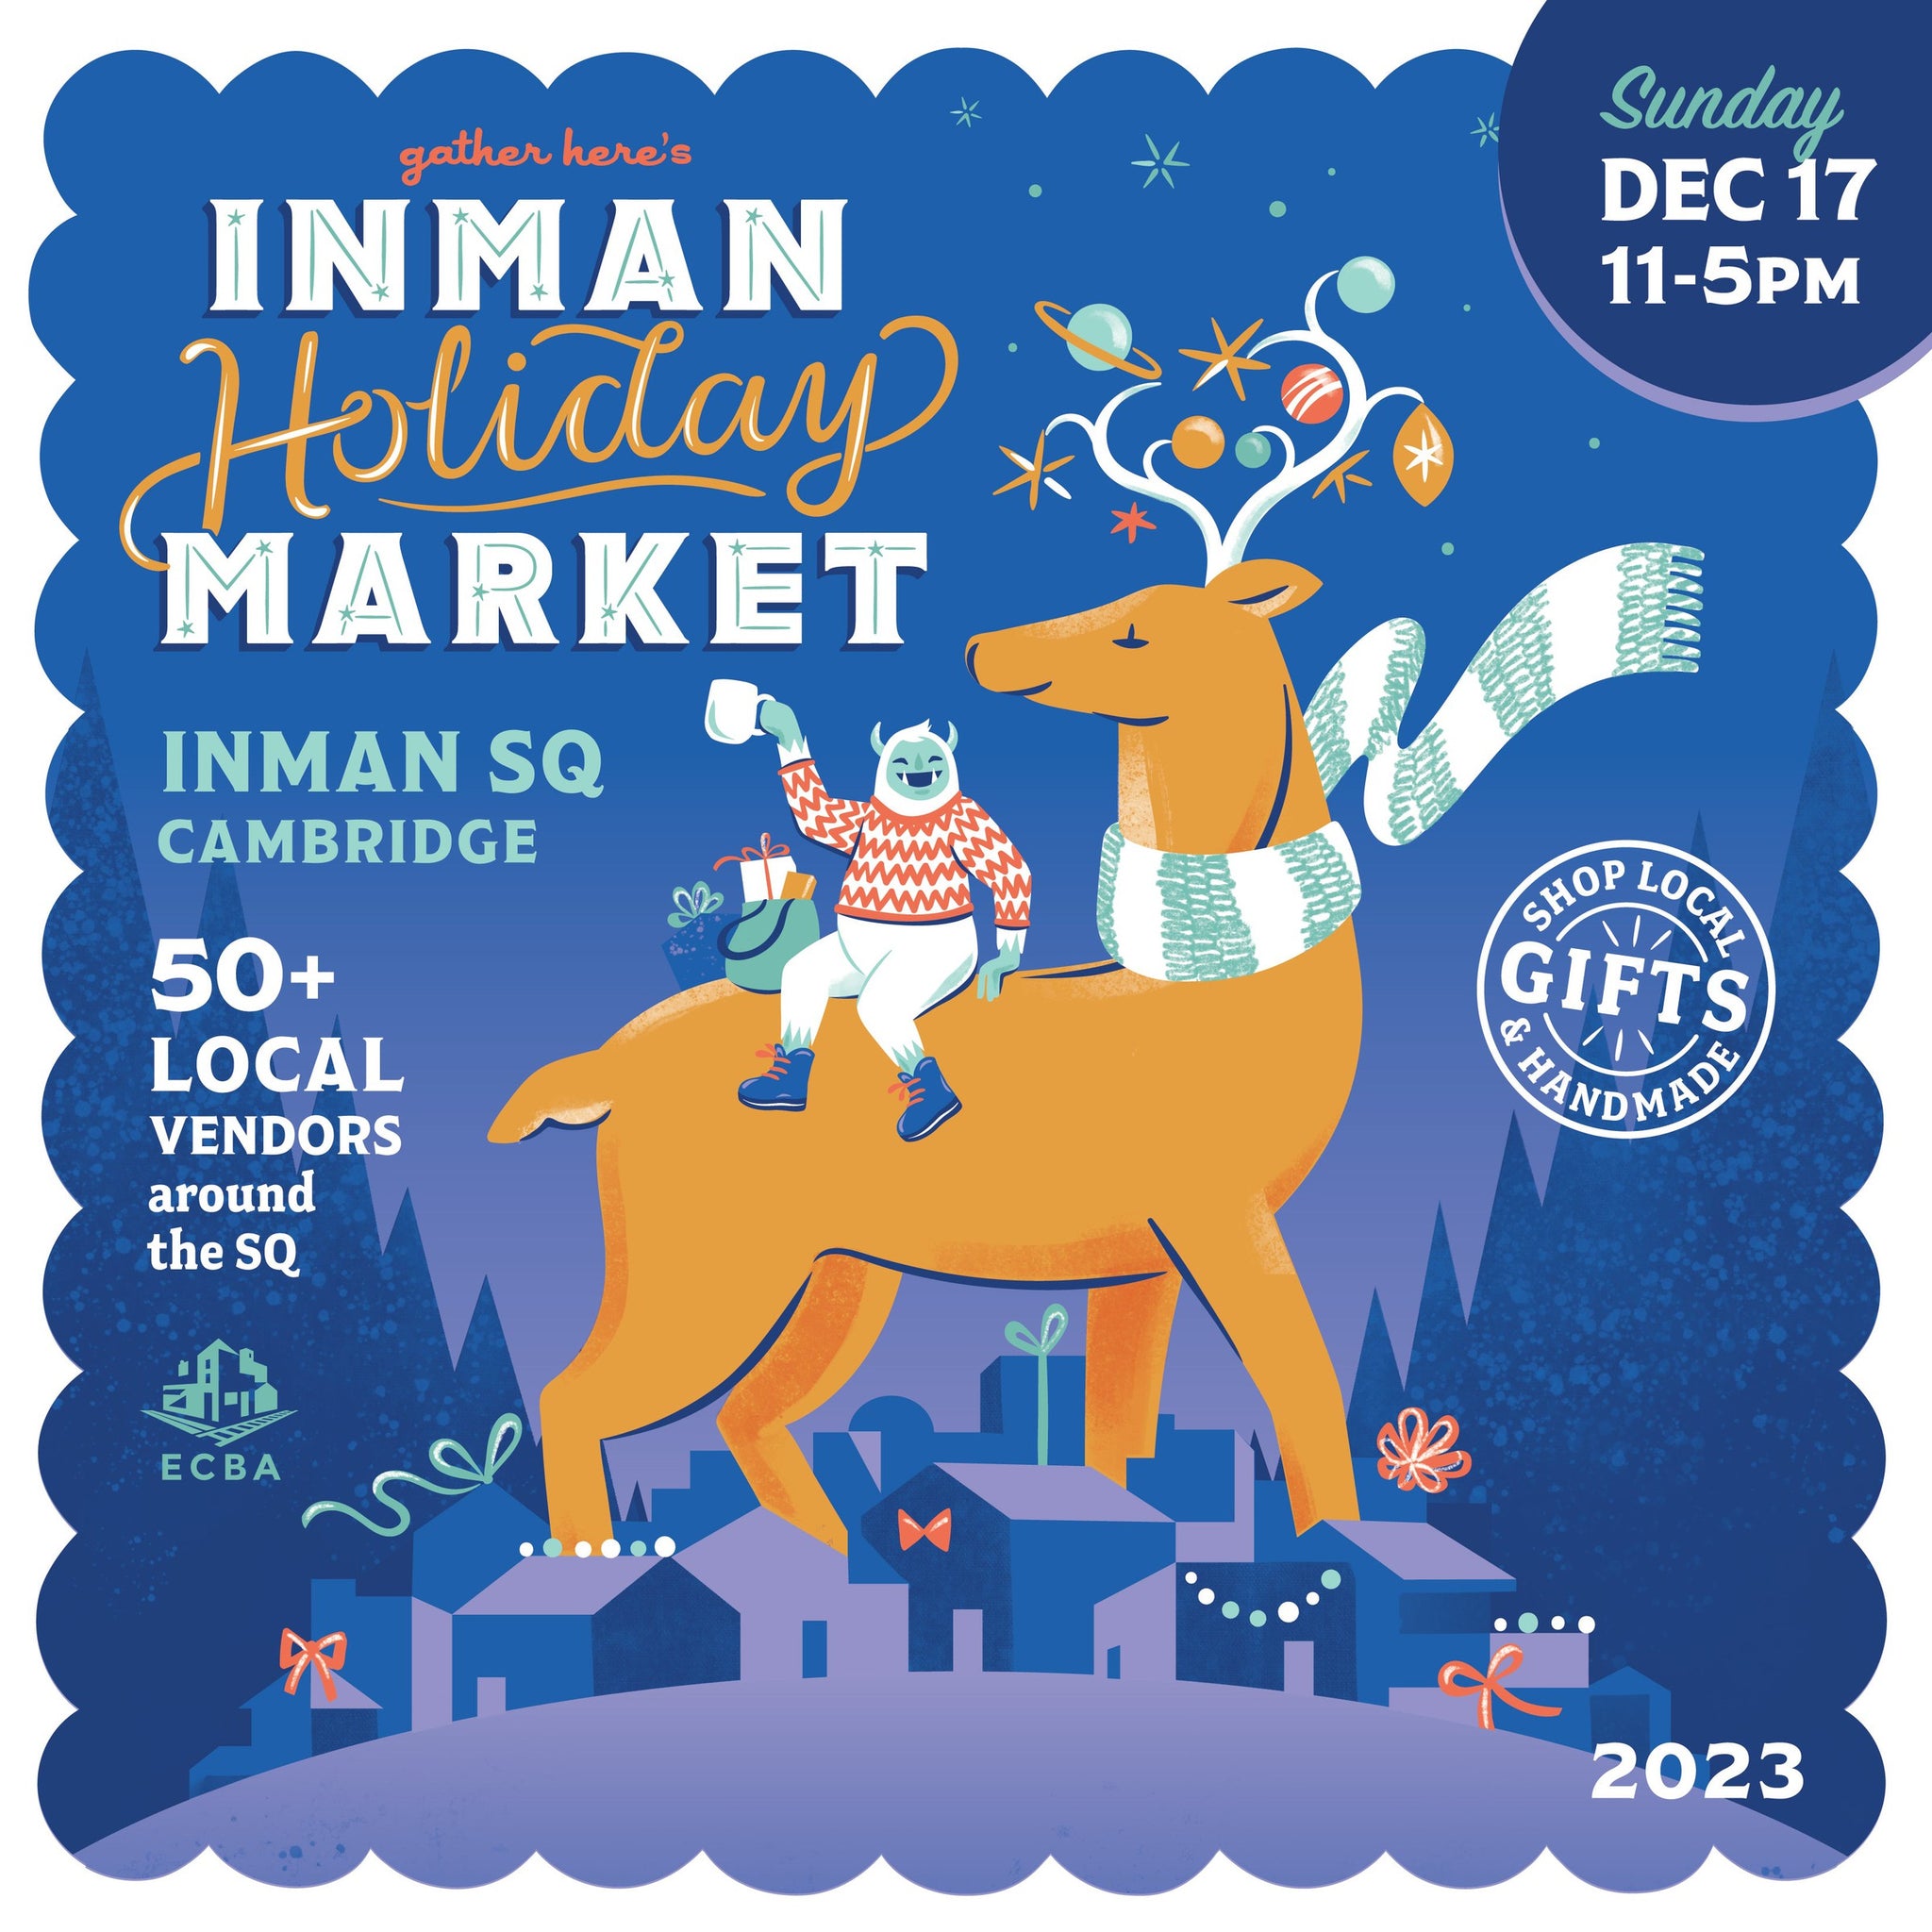 gather here-Inman Square Holiday Market 2023-EVENT-gather here online